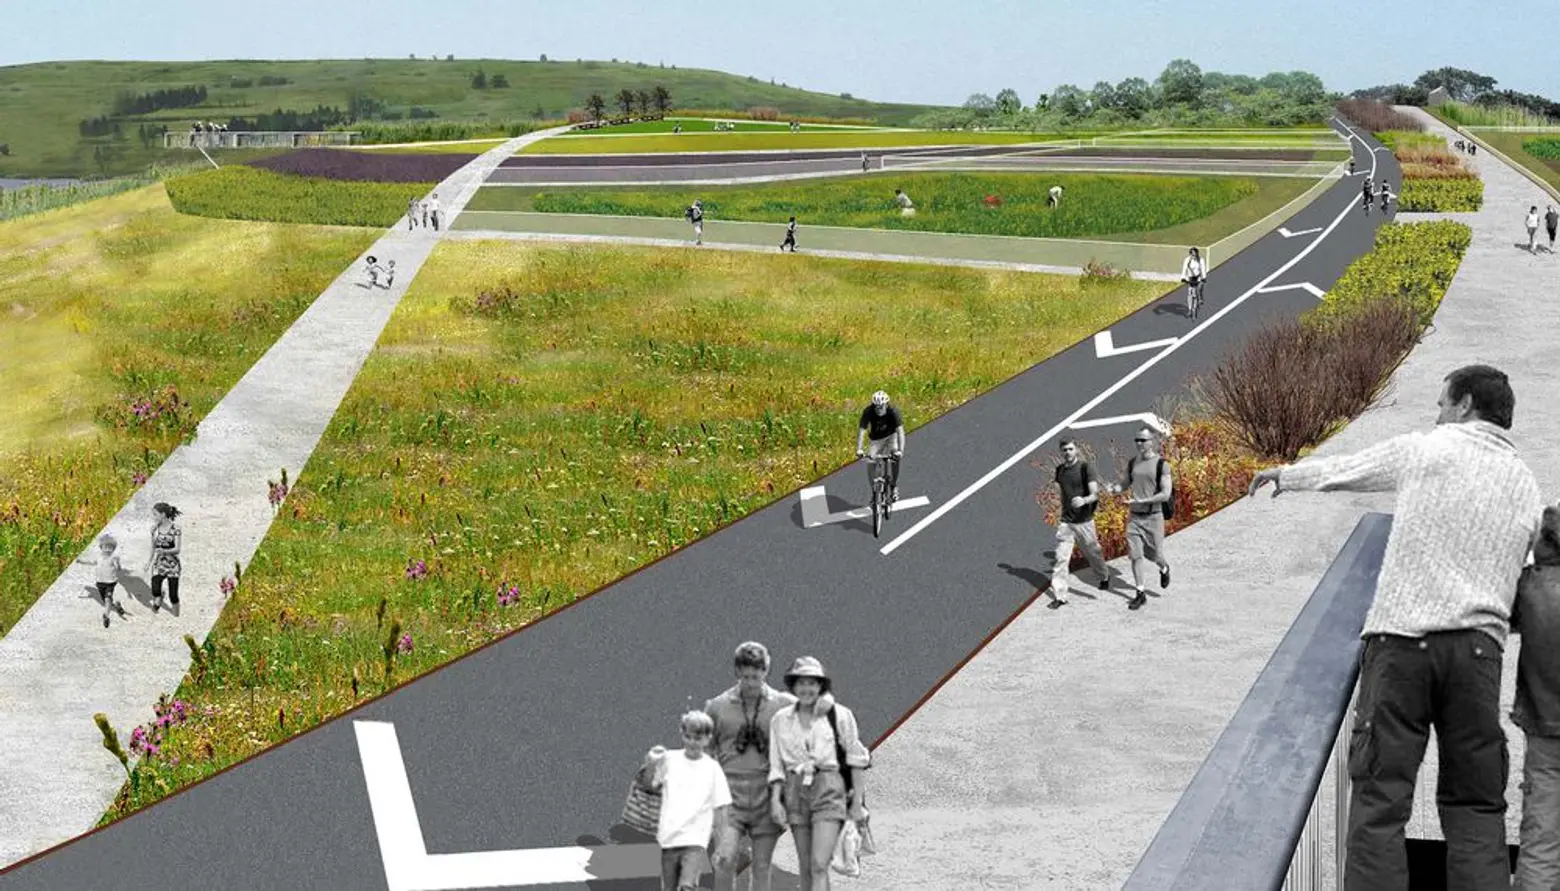 Construction contract awarded for first major phase of Freshkills Park